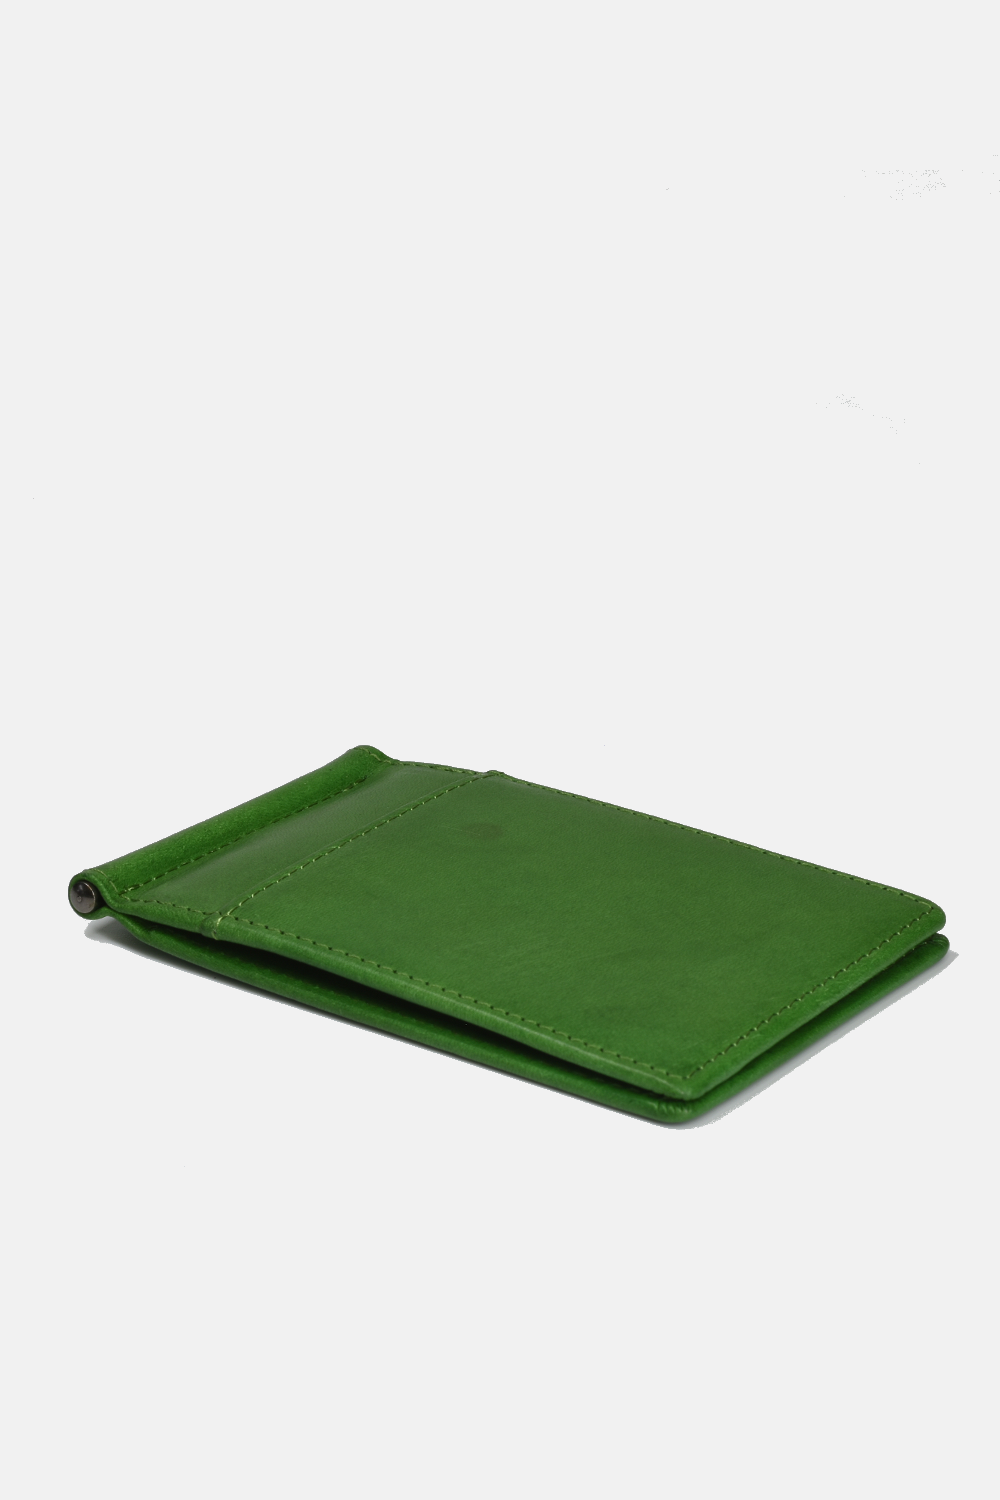 green wallet laying flat against a white background